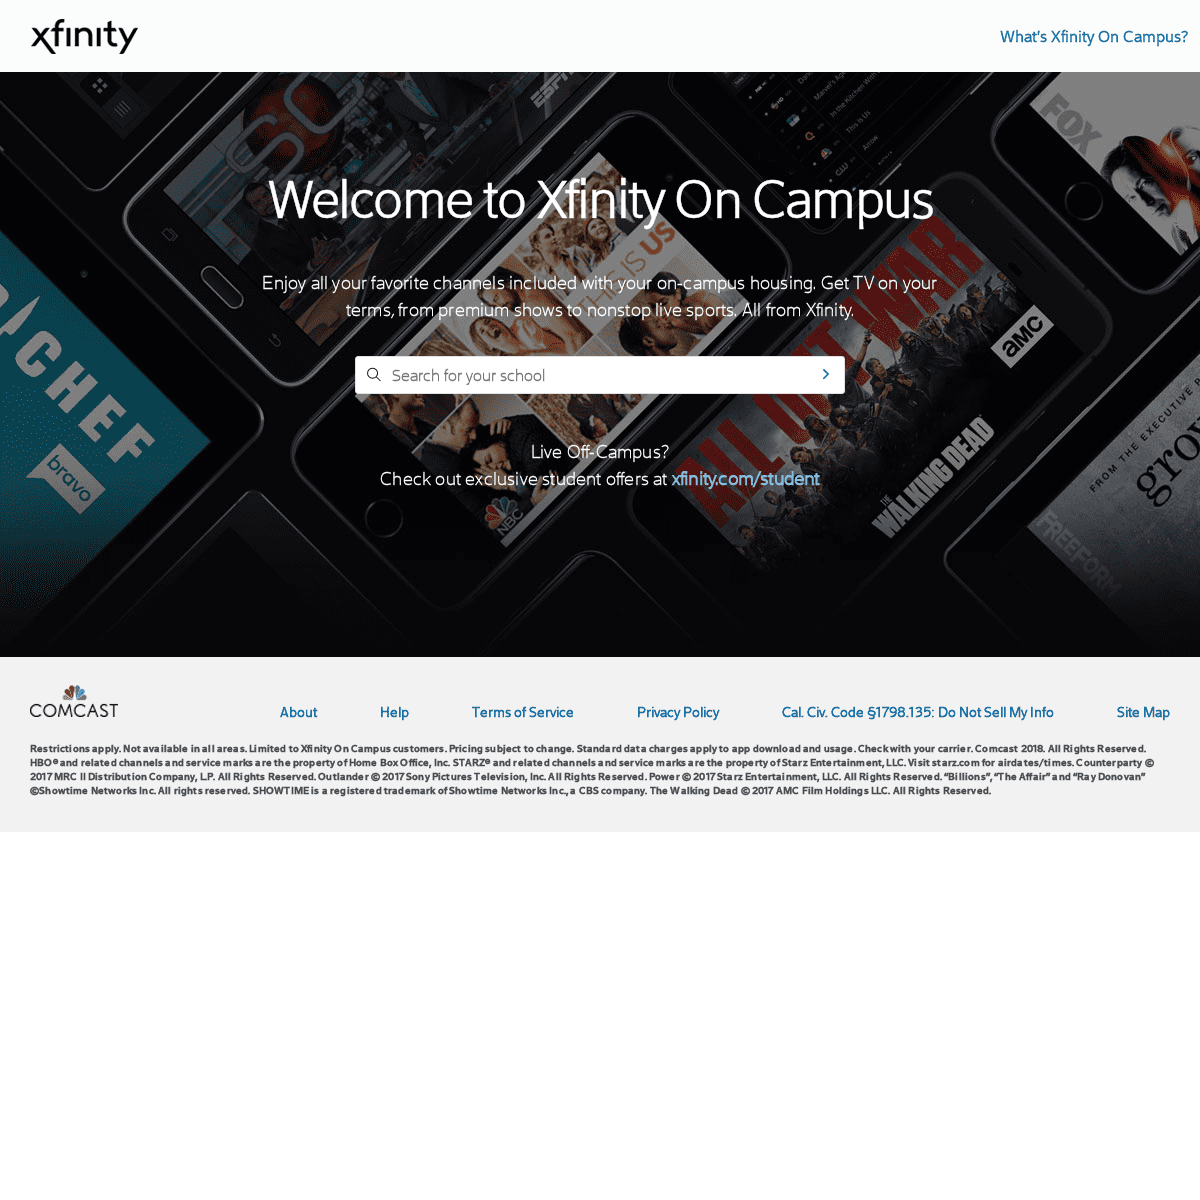 A complete backup of https://xfinityoncampus.com